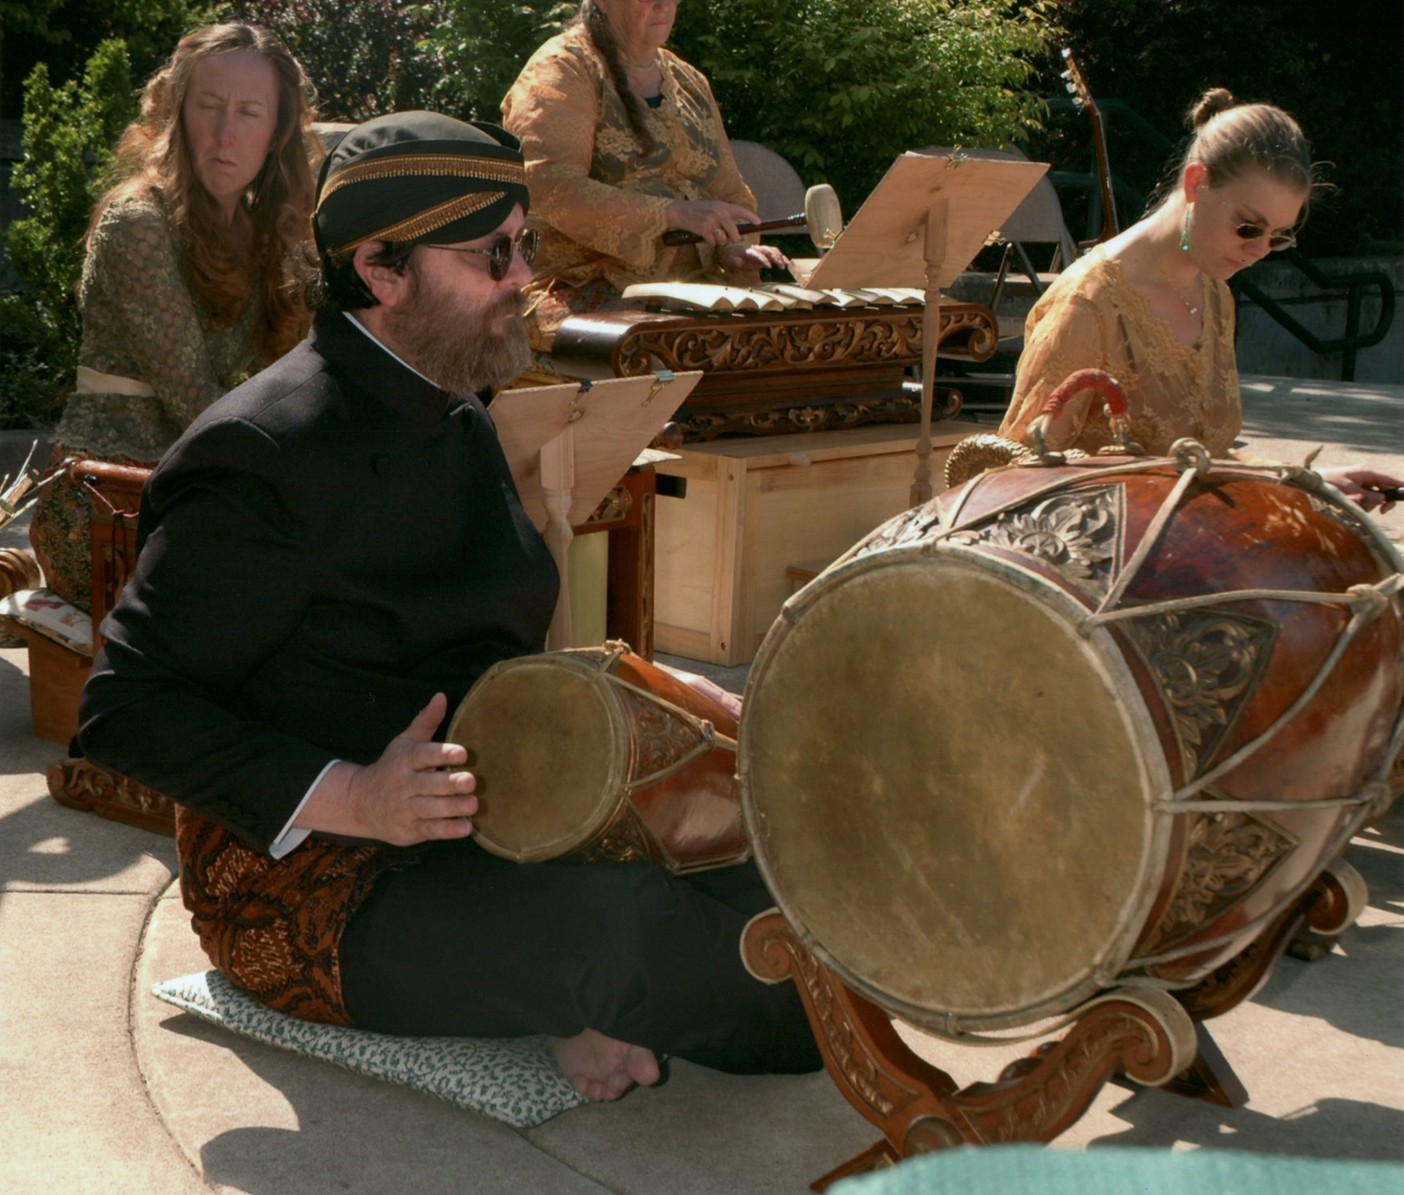 A man plays the drums with the rest of the ensemble behind him